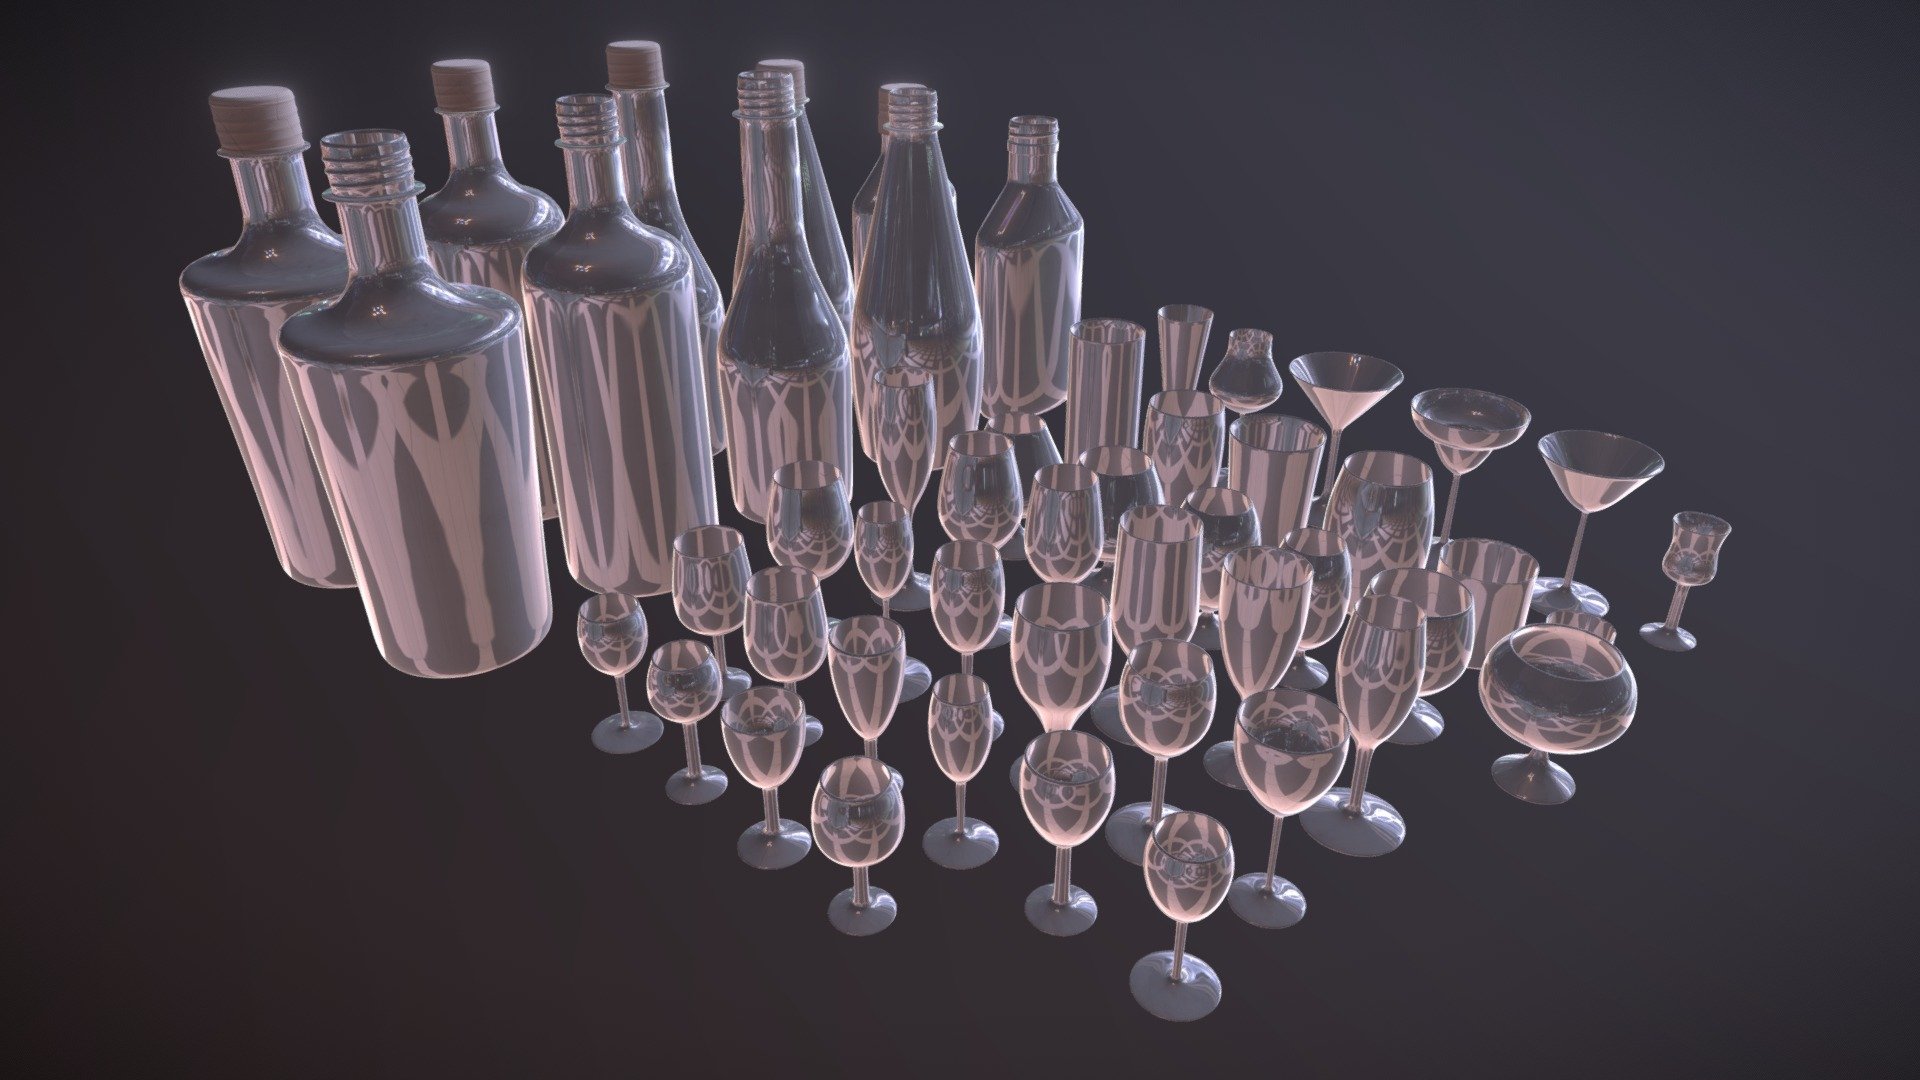 Glass cups and glass bottles , modeled in Blender, can be used in architectural house animations, architectural visualization(Arch Viz).


40 Glass cups 🥛🍷🍸🍹🥂
10 Glass bottles 🍾 (with and without bottle lids)

✅ PBR (metalness)

✅ diffuse

✅ roughness

✅ normal

✅ metalness

✅ UV unwrapped

✅ 2K textures (2048x2048)



If you find this 3D model useful, please consider supporting by purchasing my store models,

thank you:)
https://sketchfab.com/Helindu/store - The ultimate glass pack (cups and bottles) - Download Free 3D model by Helindu 3d model